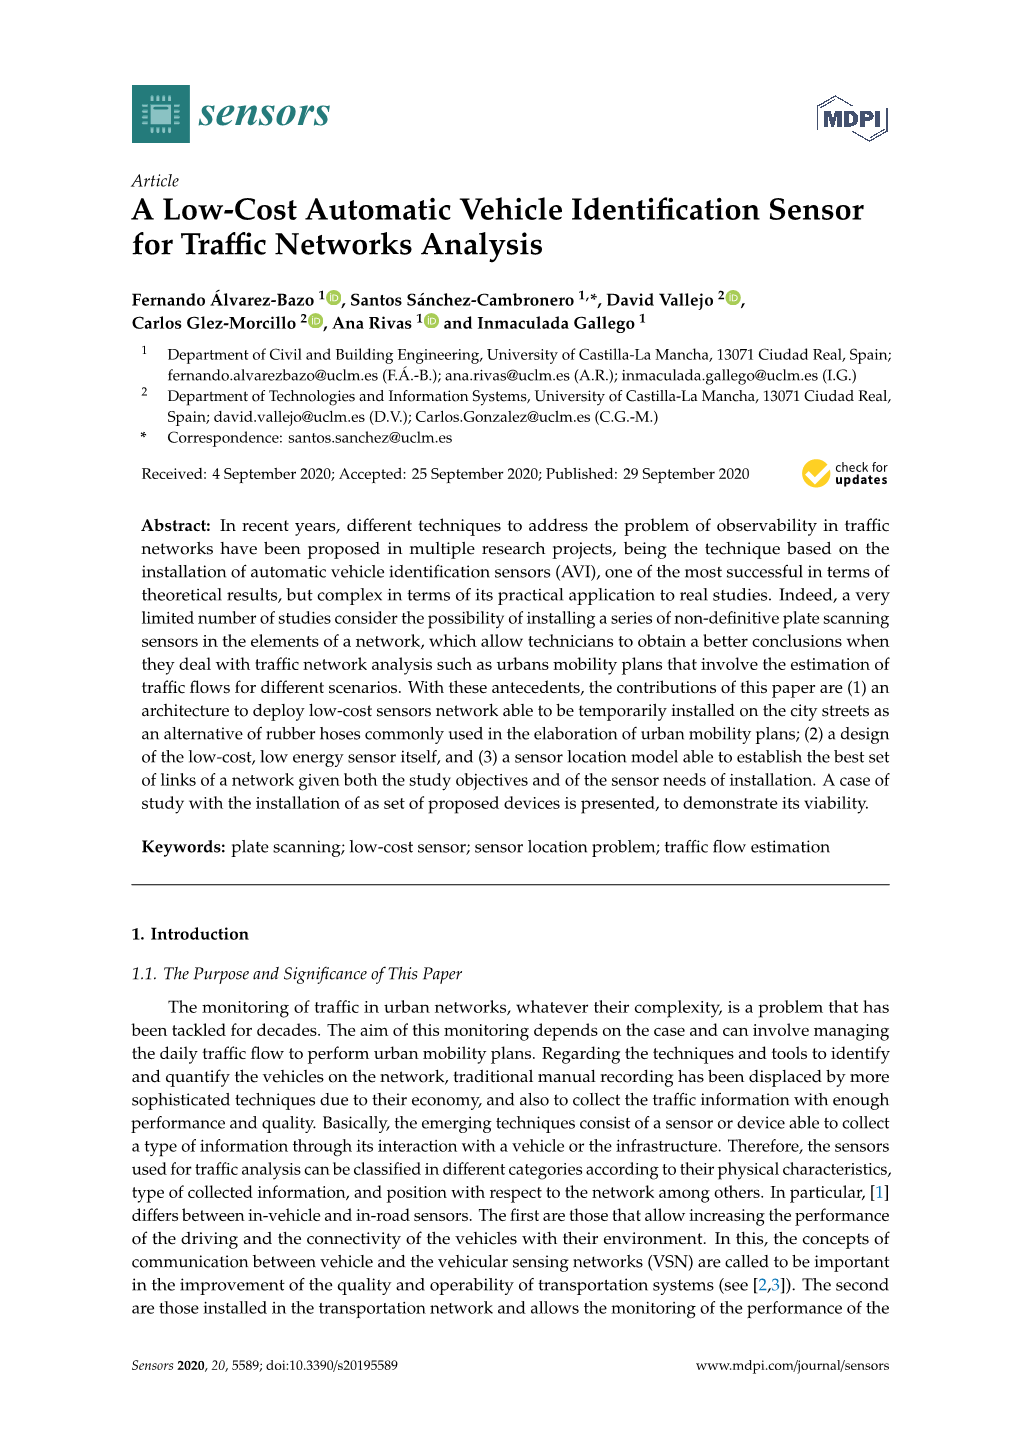 A Low-Cost Automatic Vehicle Identification Sensor for Traffic Networks Analysis